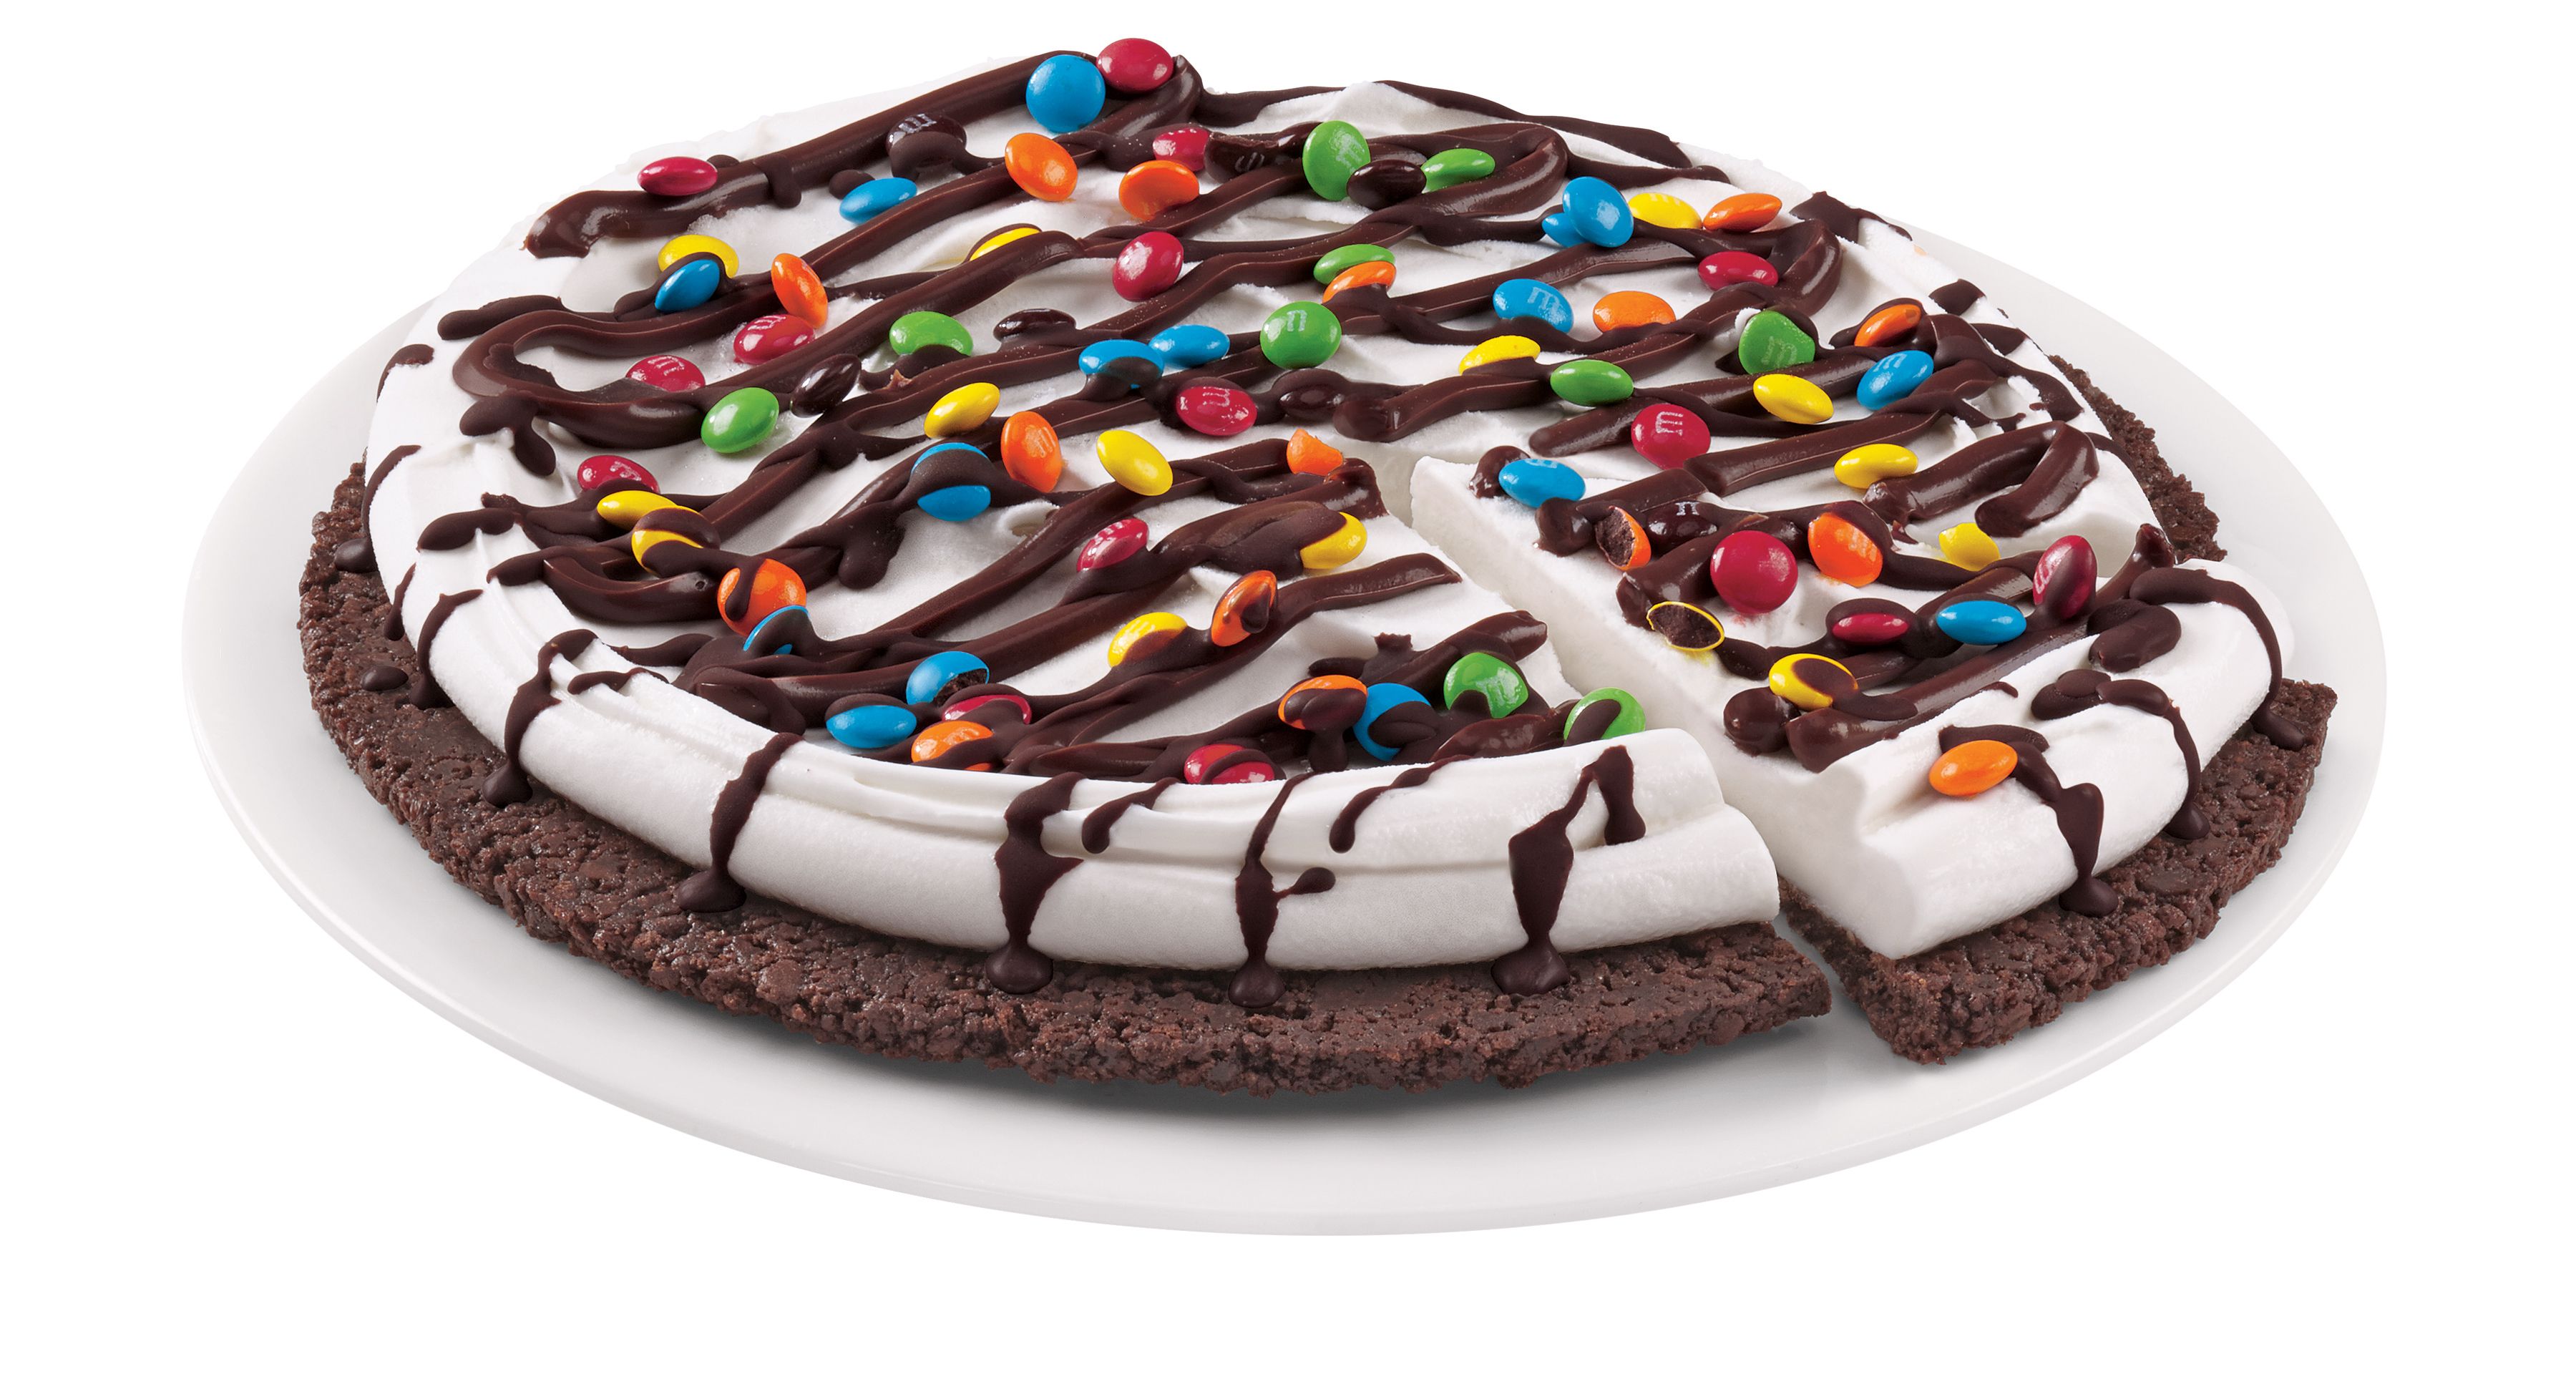 Omg Dairy Queen Is Making Ice Cream Pizza